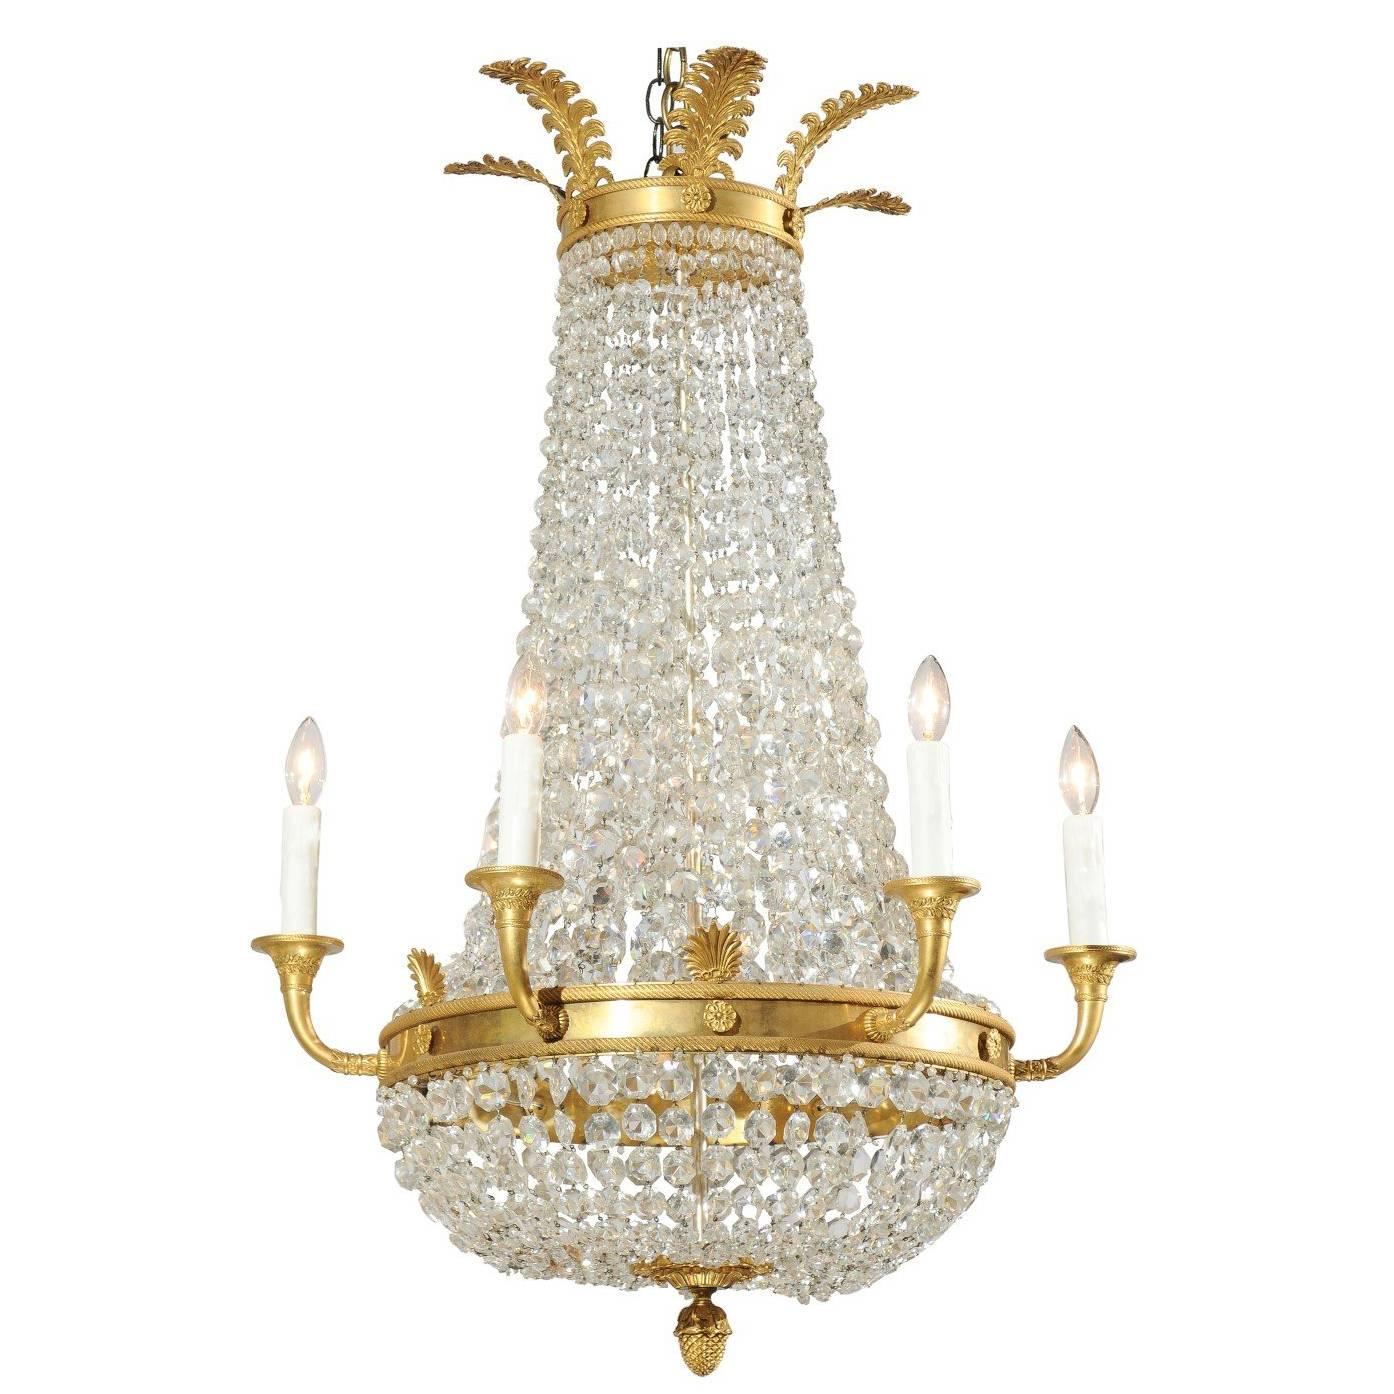 French Empire Style Crystal and Gilt Metal Waterfall Basket Six-Arm Chandelier